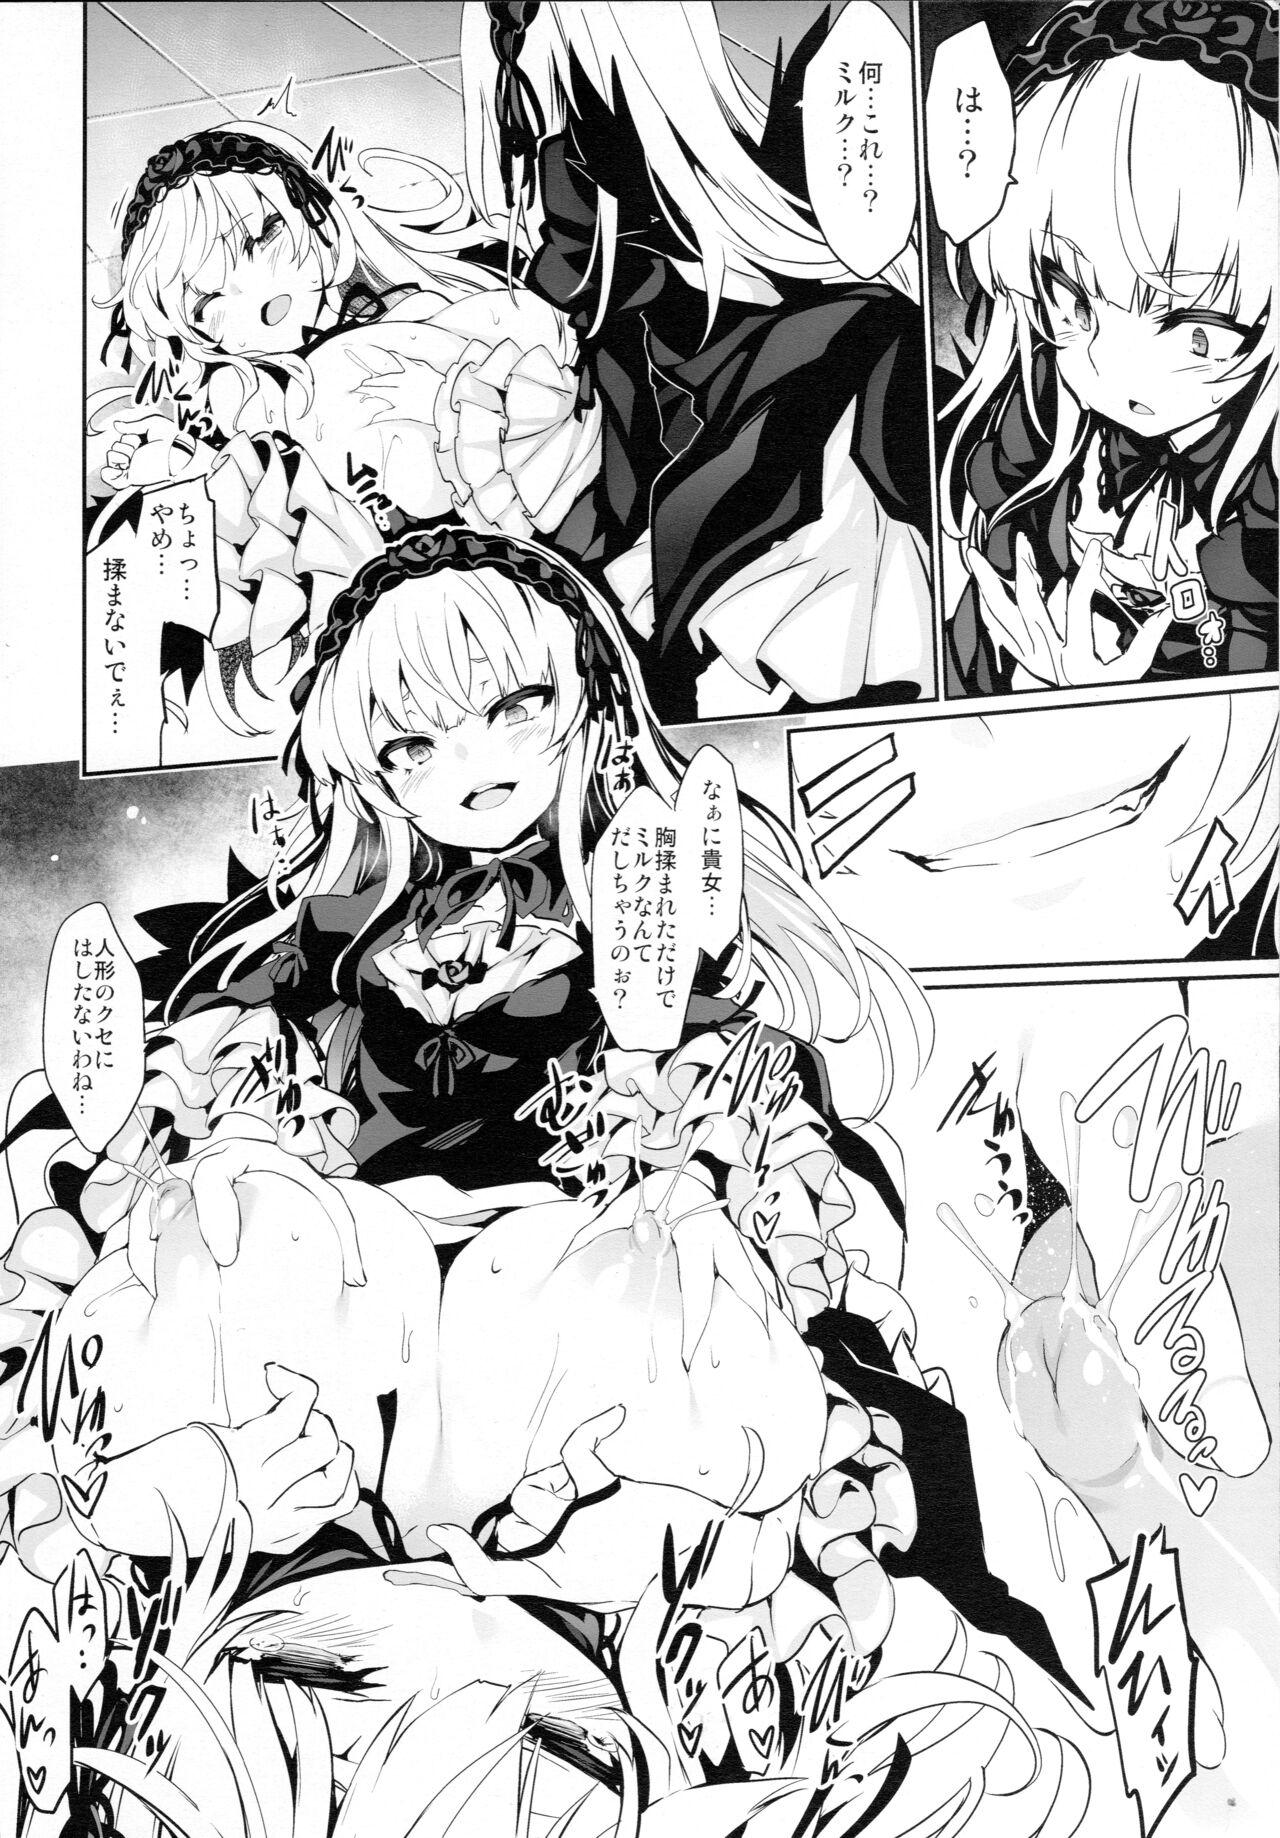 Tight Ass Drink, or not? - Rozen maiden Party - Page 7